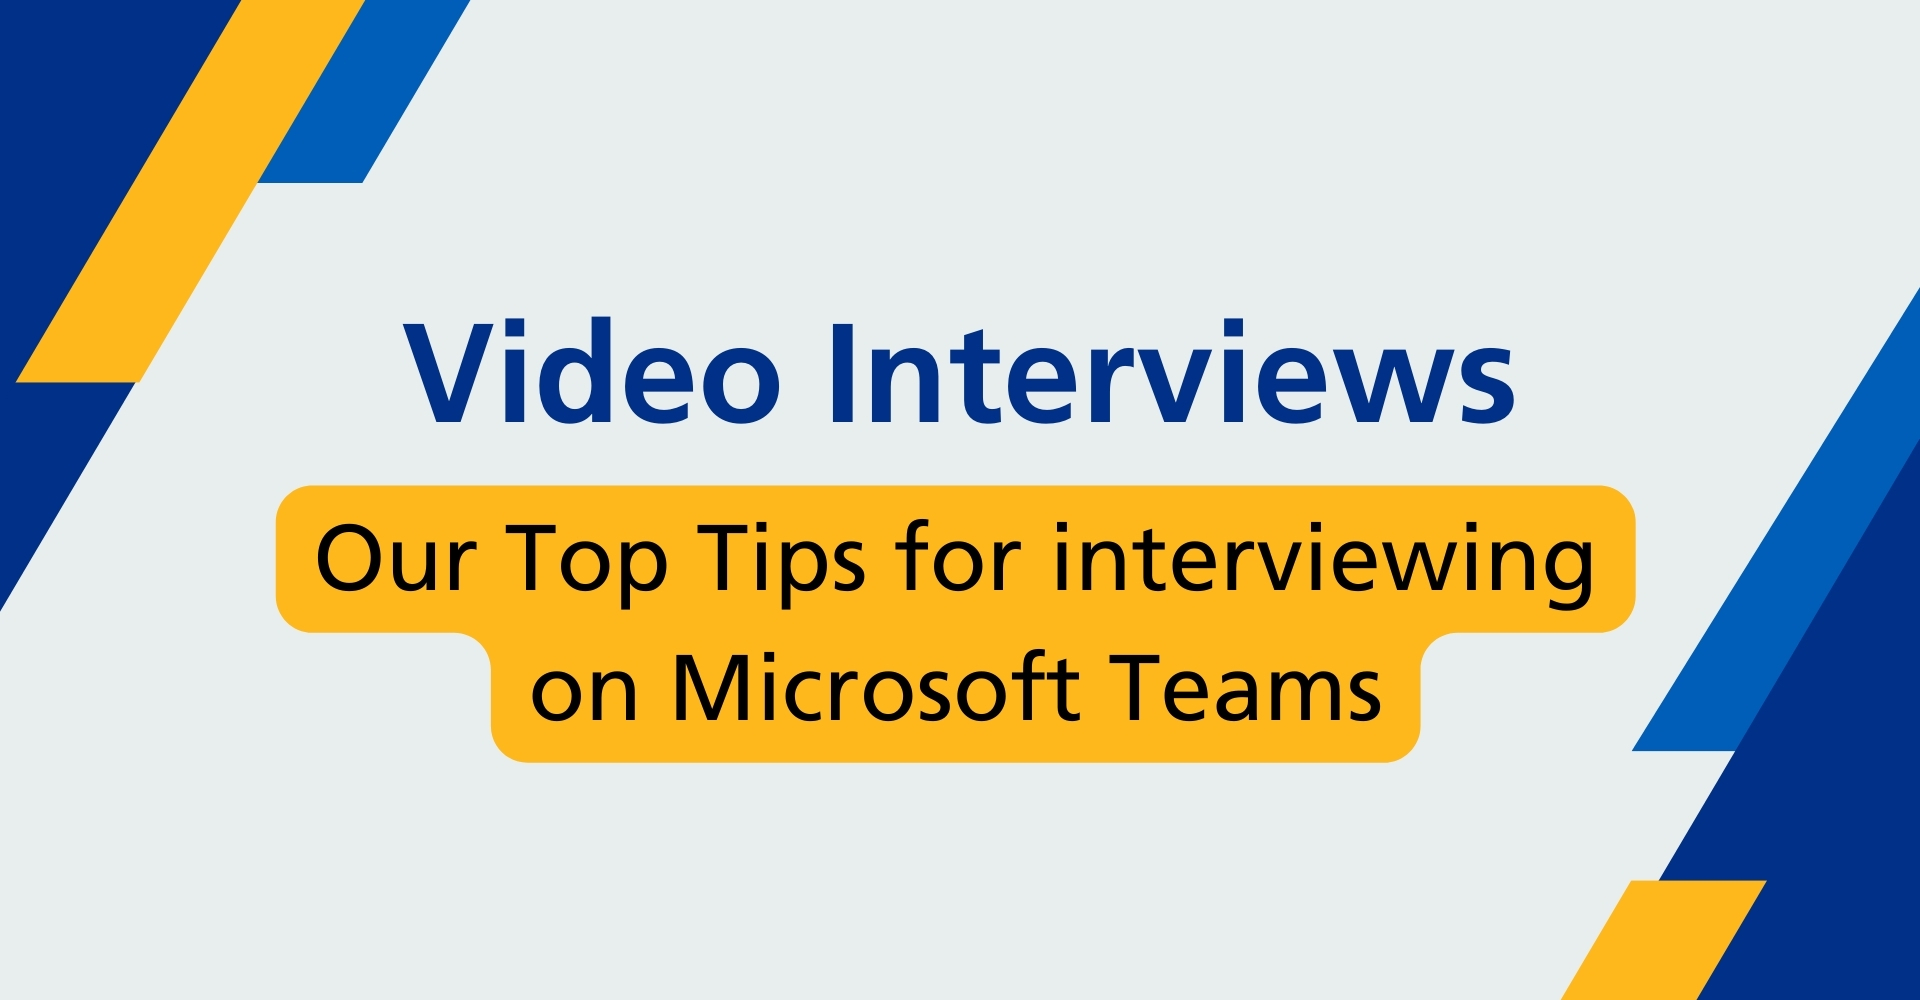 Our Top Tips for interviewing on Microsoft Teams